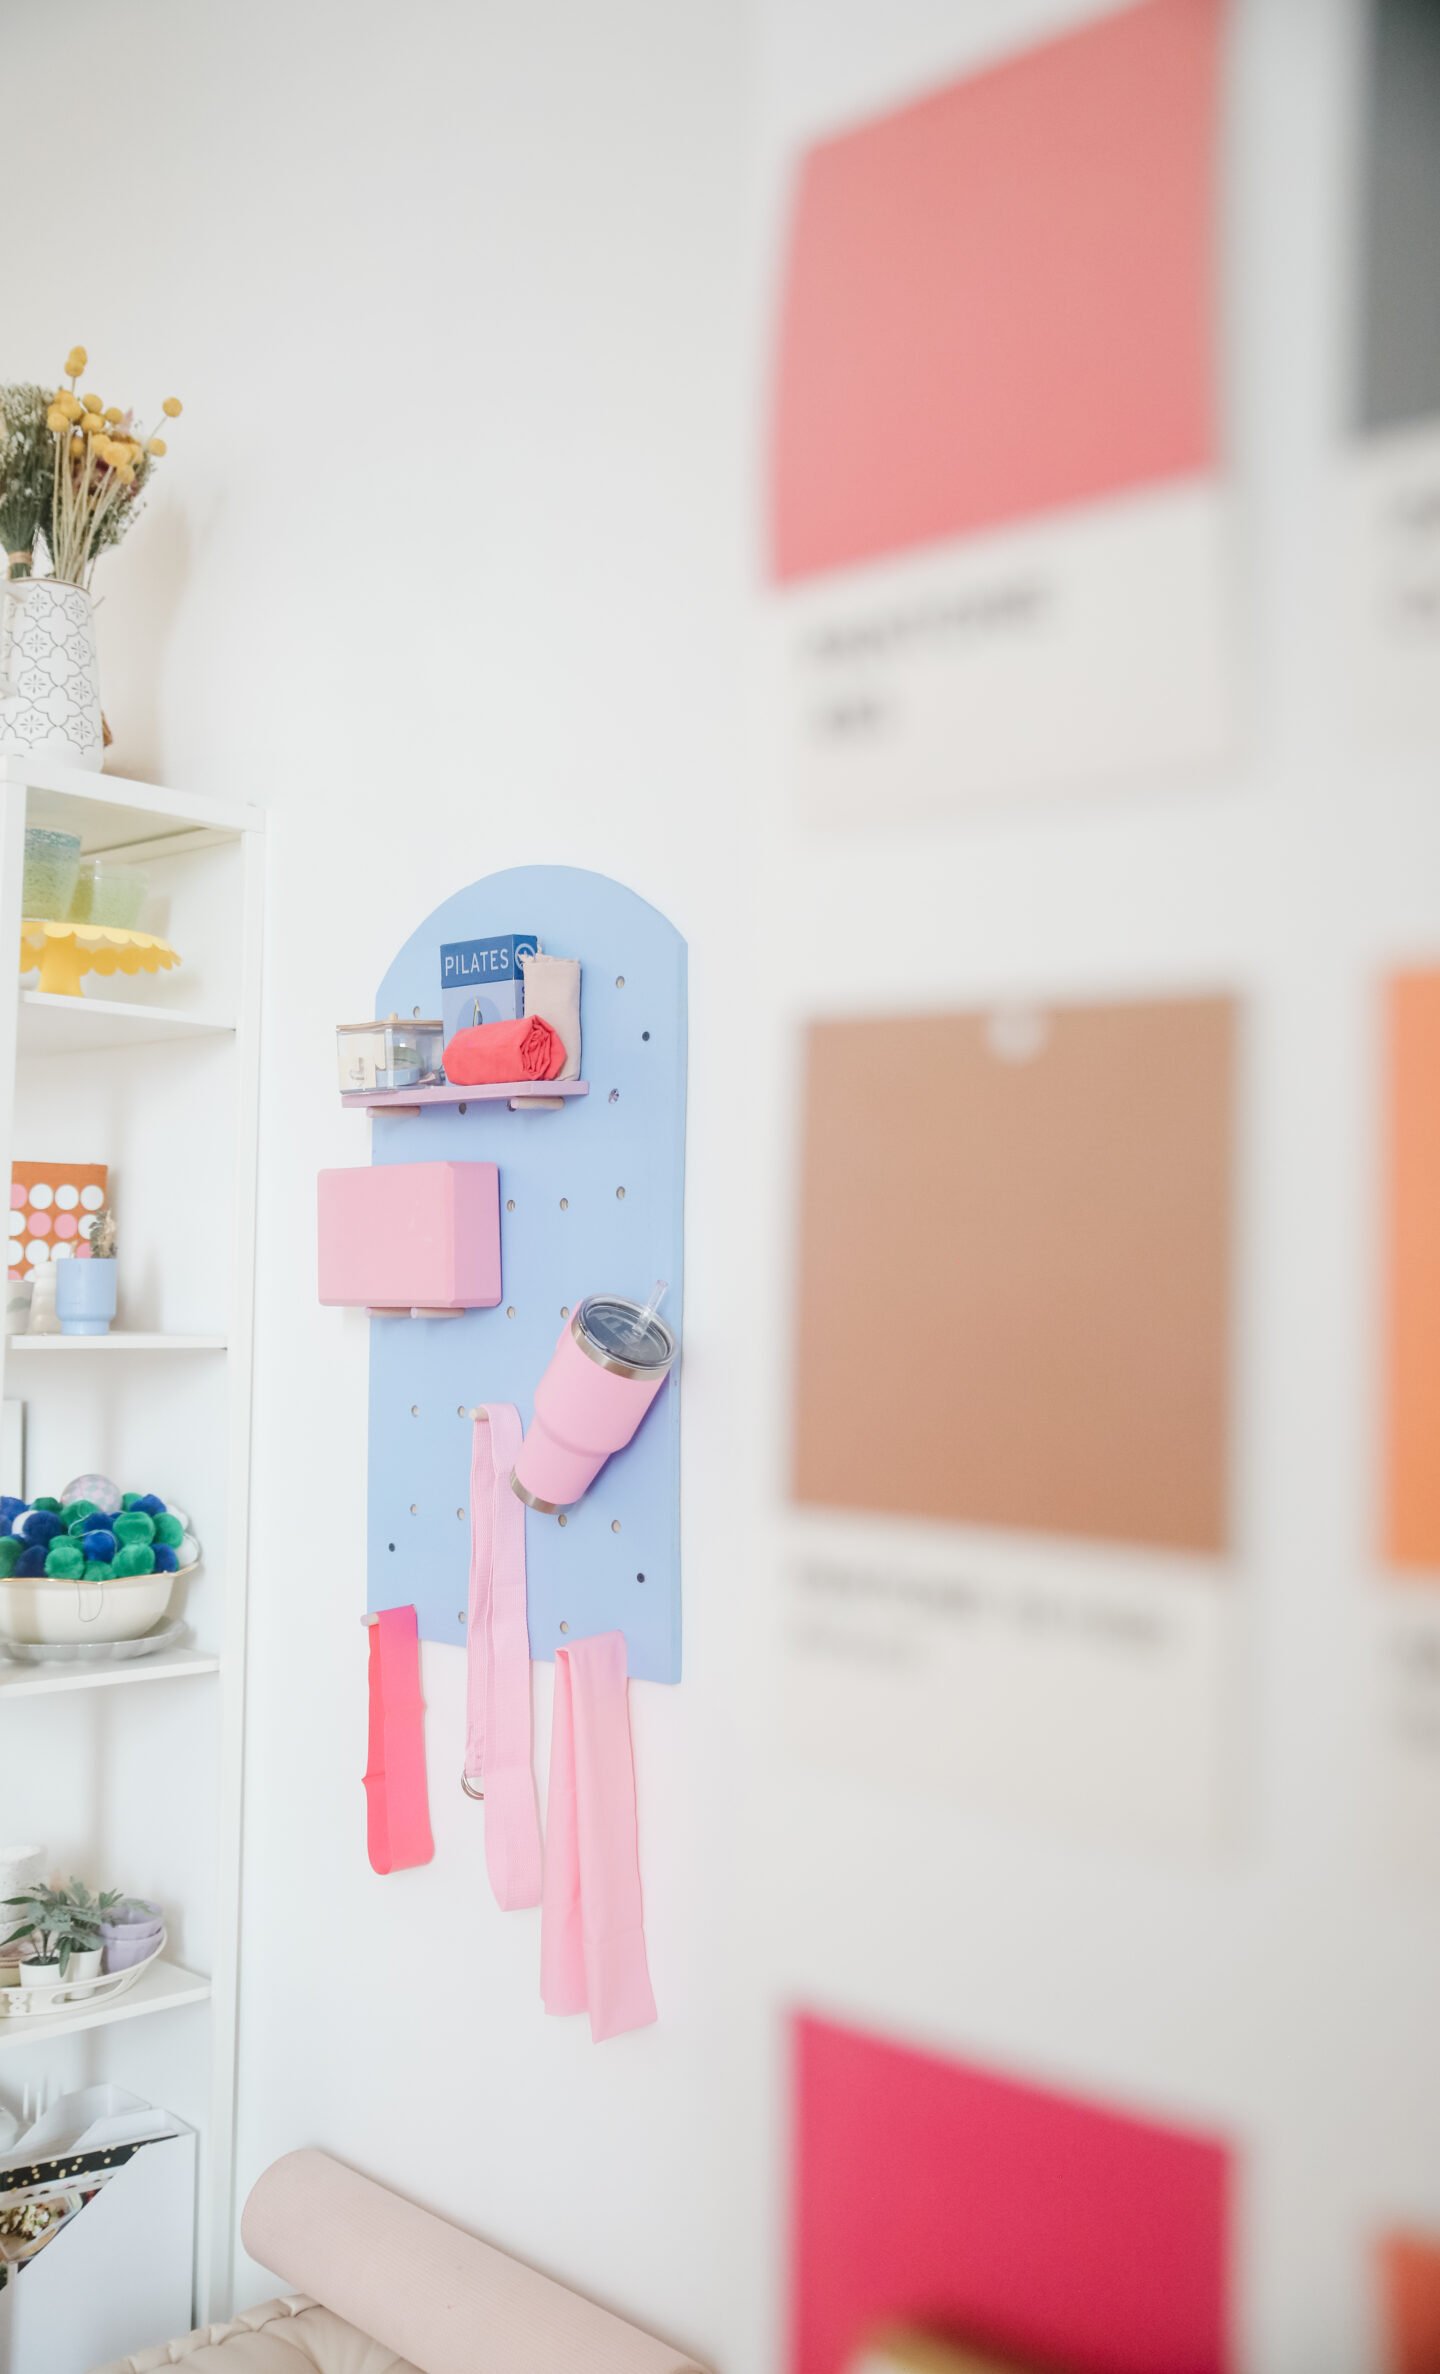 a pantone wall with a colourful pilates organizer hanged in the wall